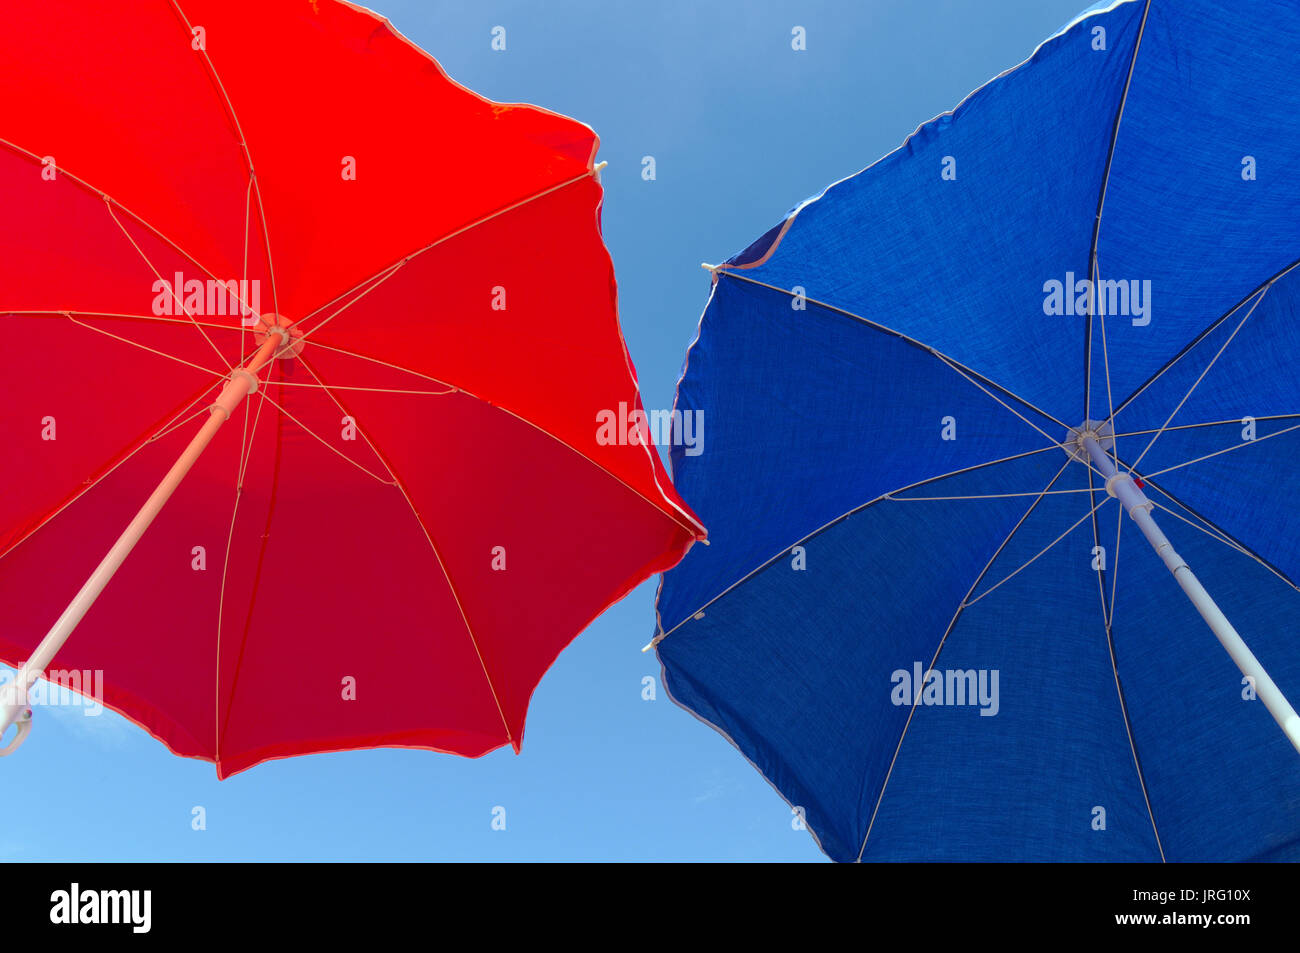 Blue and red Beach umbrella. Summertime and vacations theme Stock Photo